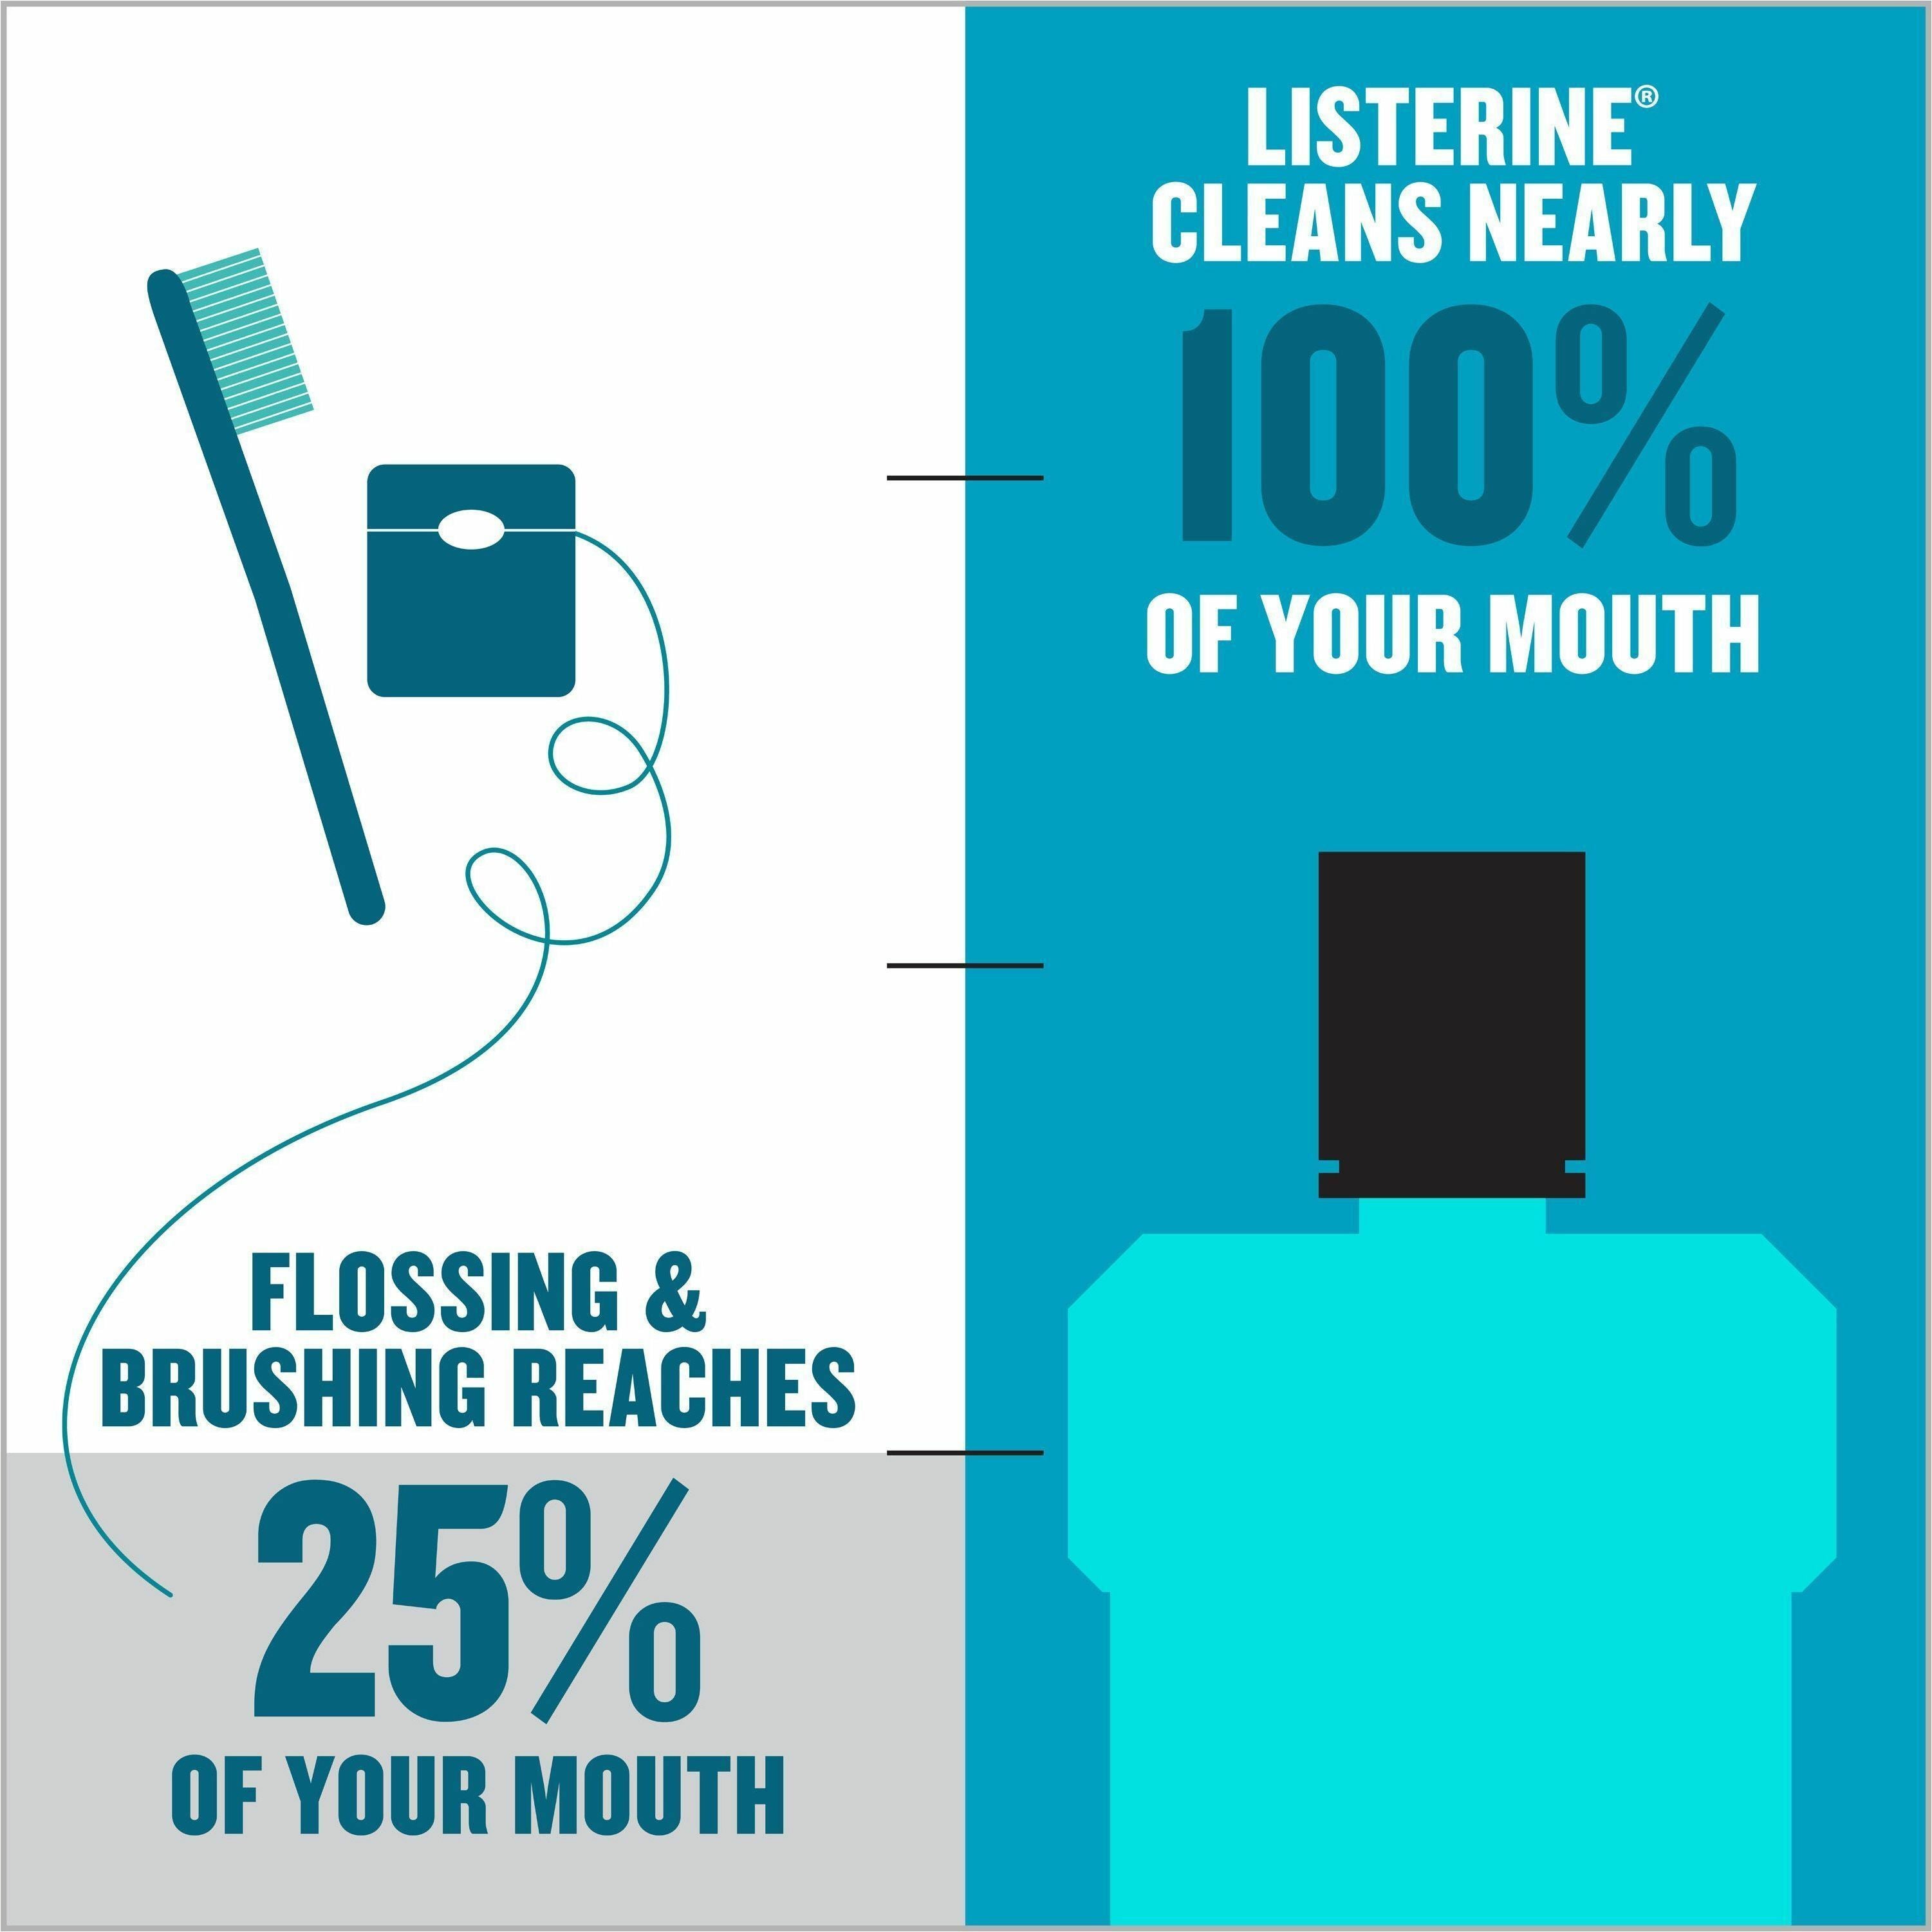 listerine-cool-mint-antiseptic-mouthwash-for-bad-breath-cleaning-cool-mint-106-quart-6-carton_joj42735ct - 2